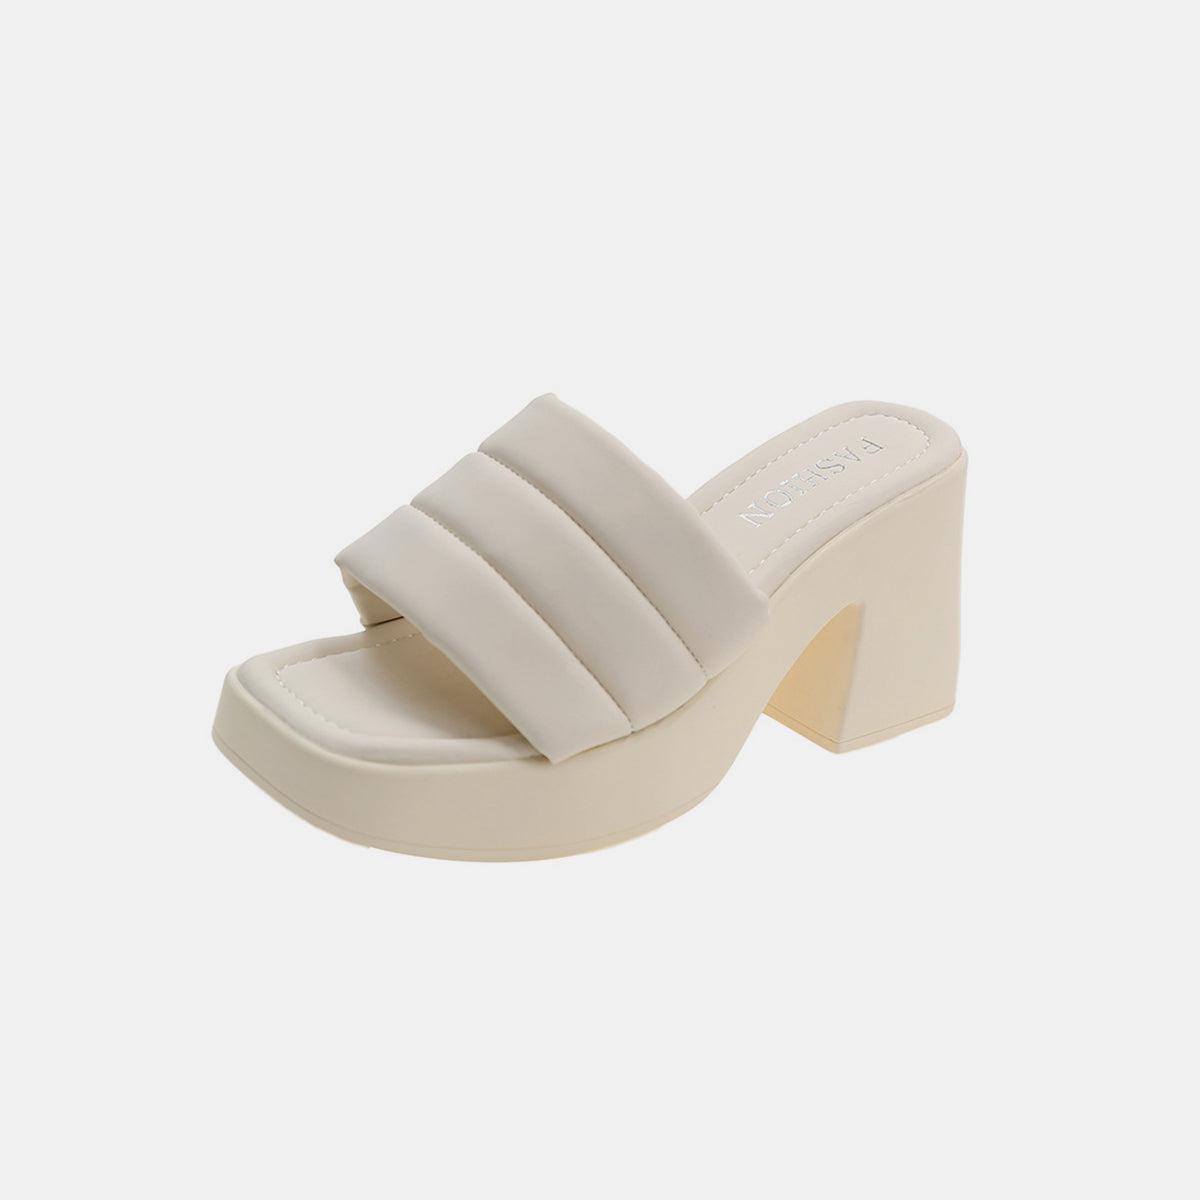 a woman's white shoe with a chunky heel